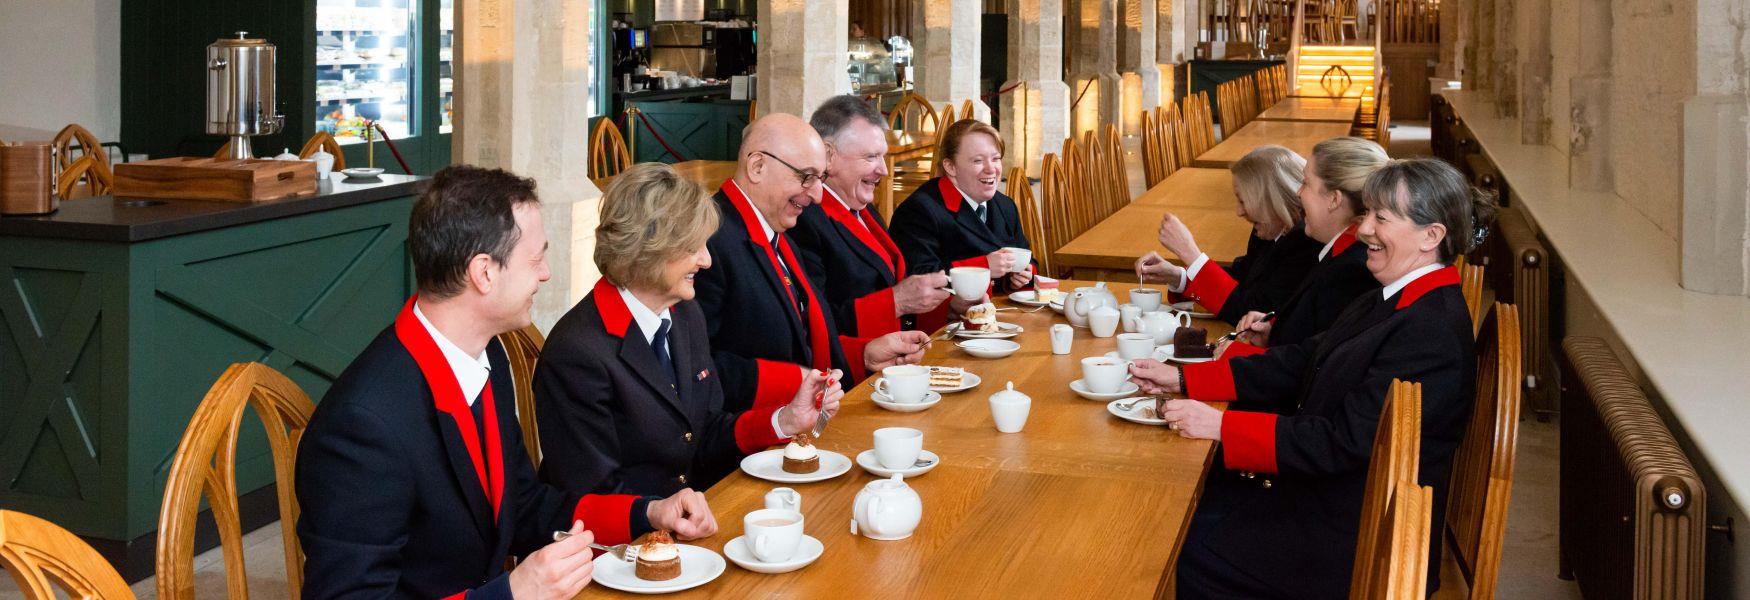 Royal Collection Trust Wardens, who welcome visitors to Windsor Castle, sampling the menu in the new Undercroft Café before it opened to the public.